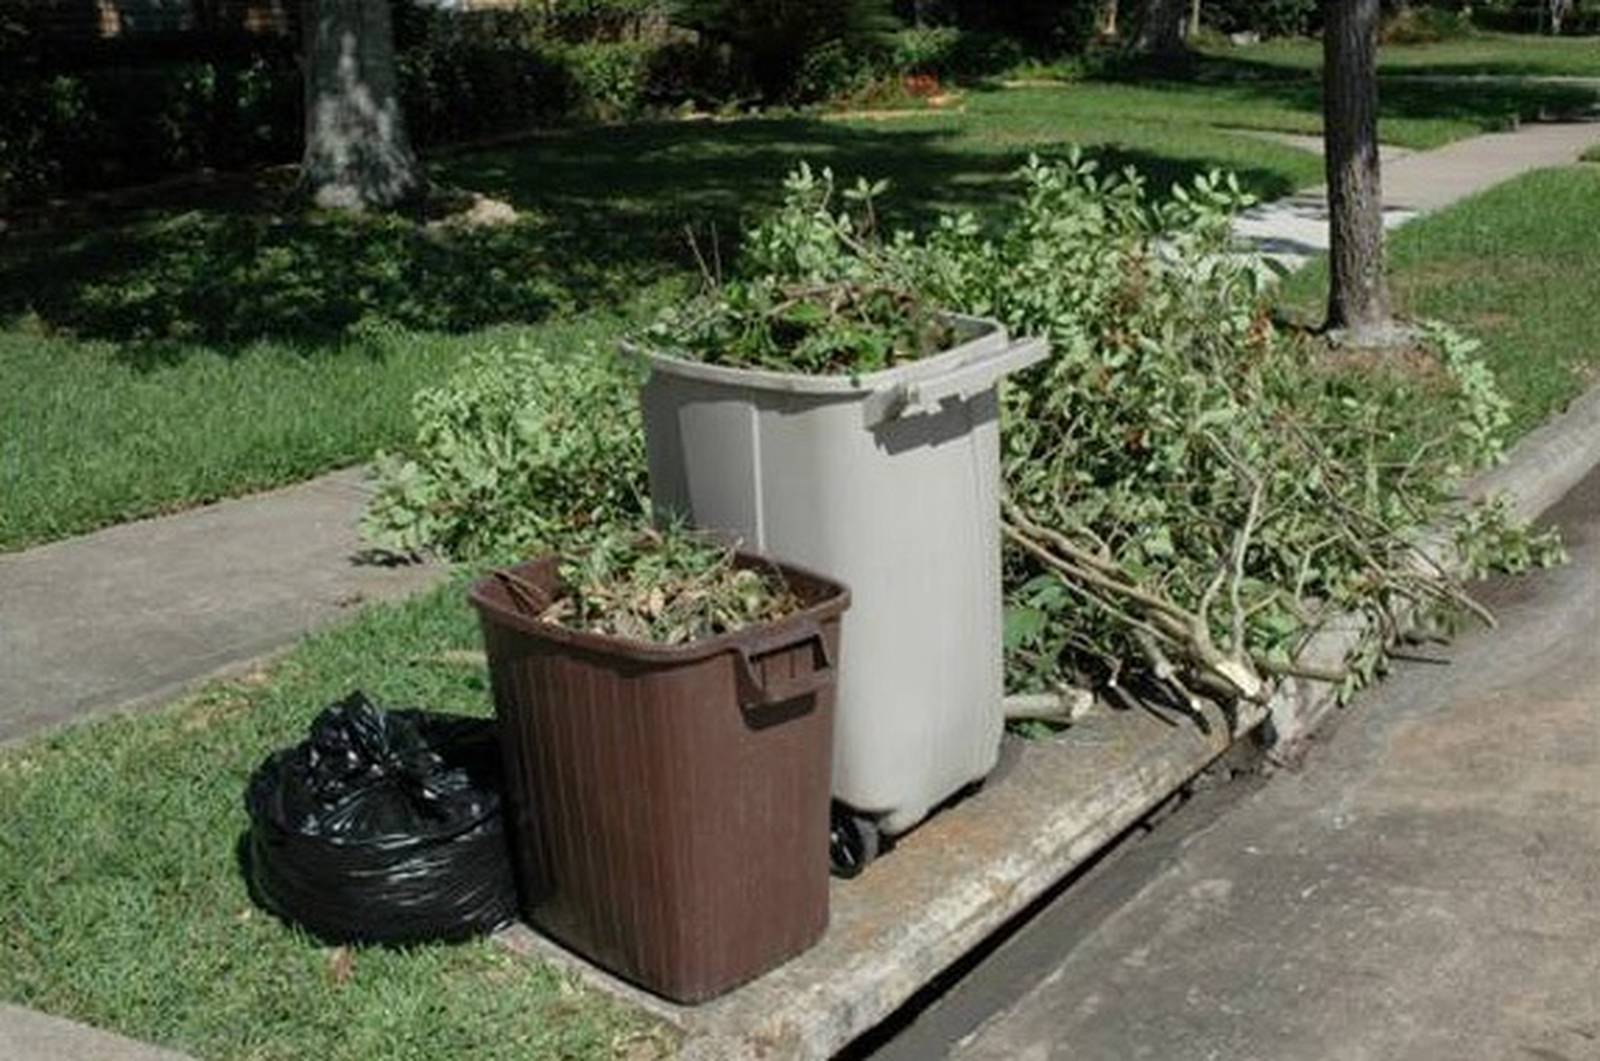 Free yard waste dropoff location opens for St. Johns County residents